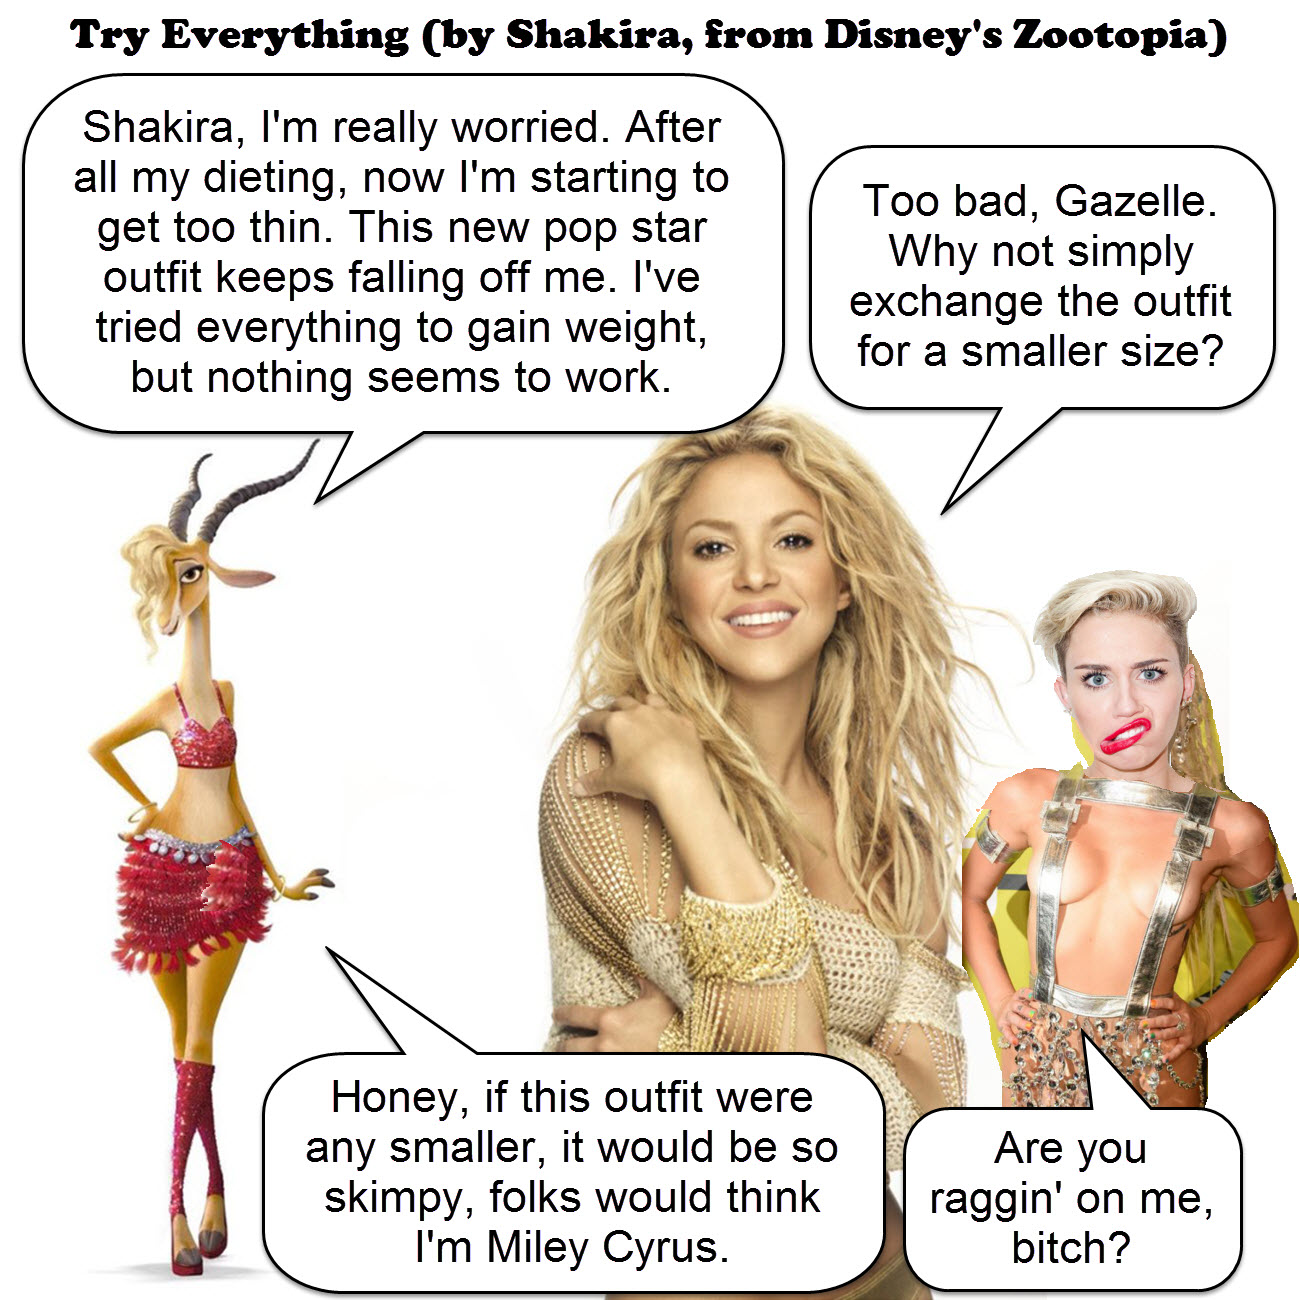 try everything - shakira-song-from-zootopia - JOKE by dgoldish on DeviantArt1300 x 1300